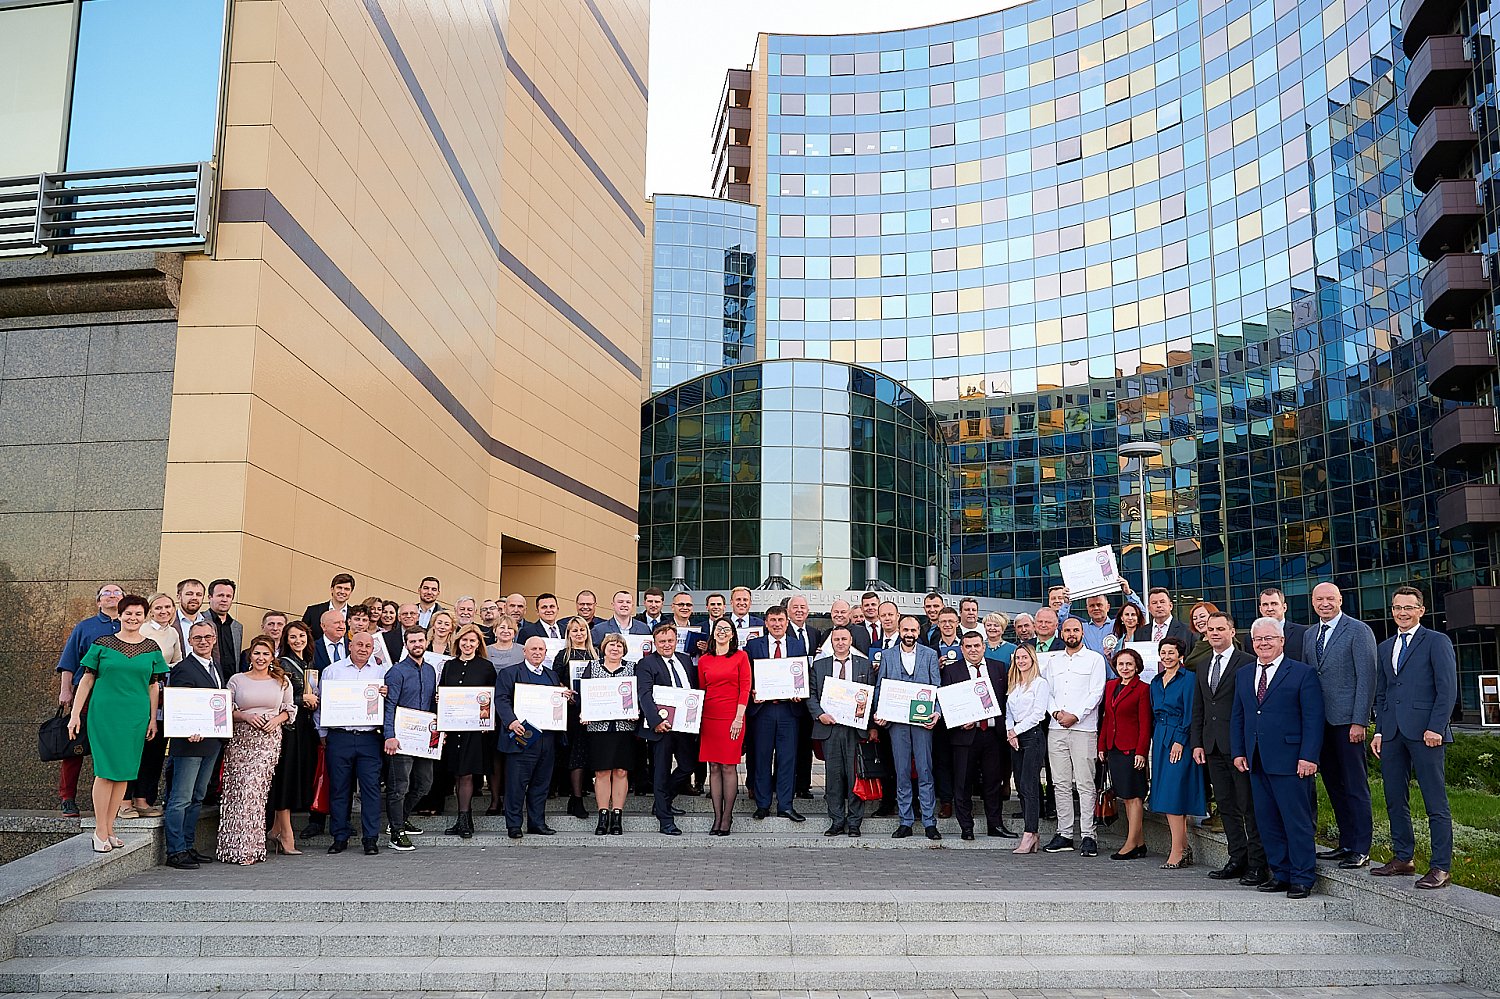 Two enterprises of the Belarusian Cement Company have won the «silver» badges of the winners of the Republican contest «The best construction product of the Year-2021»